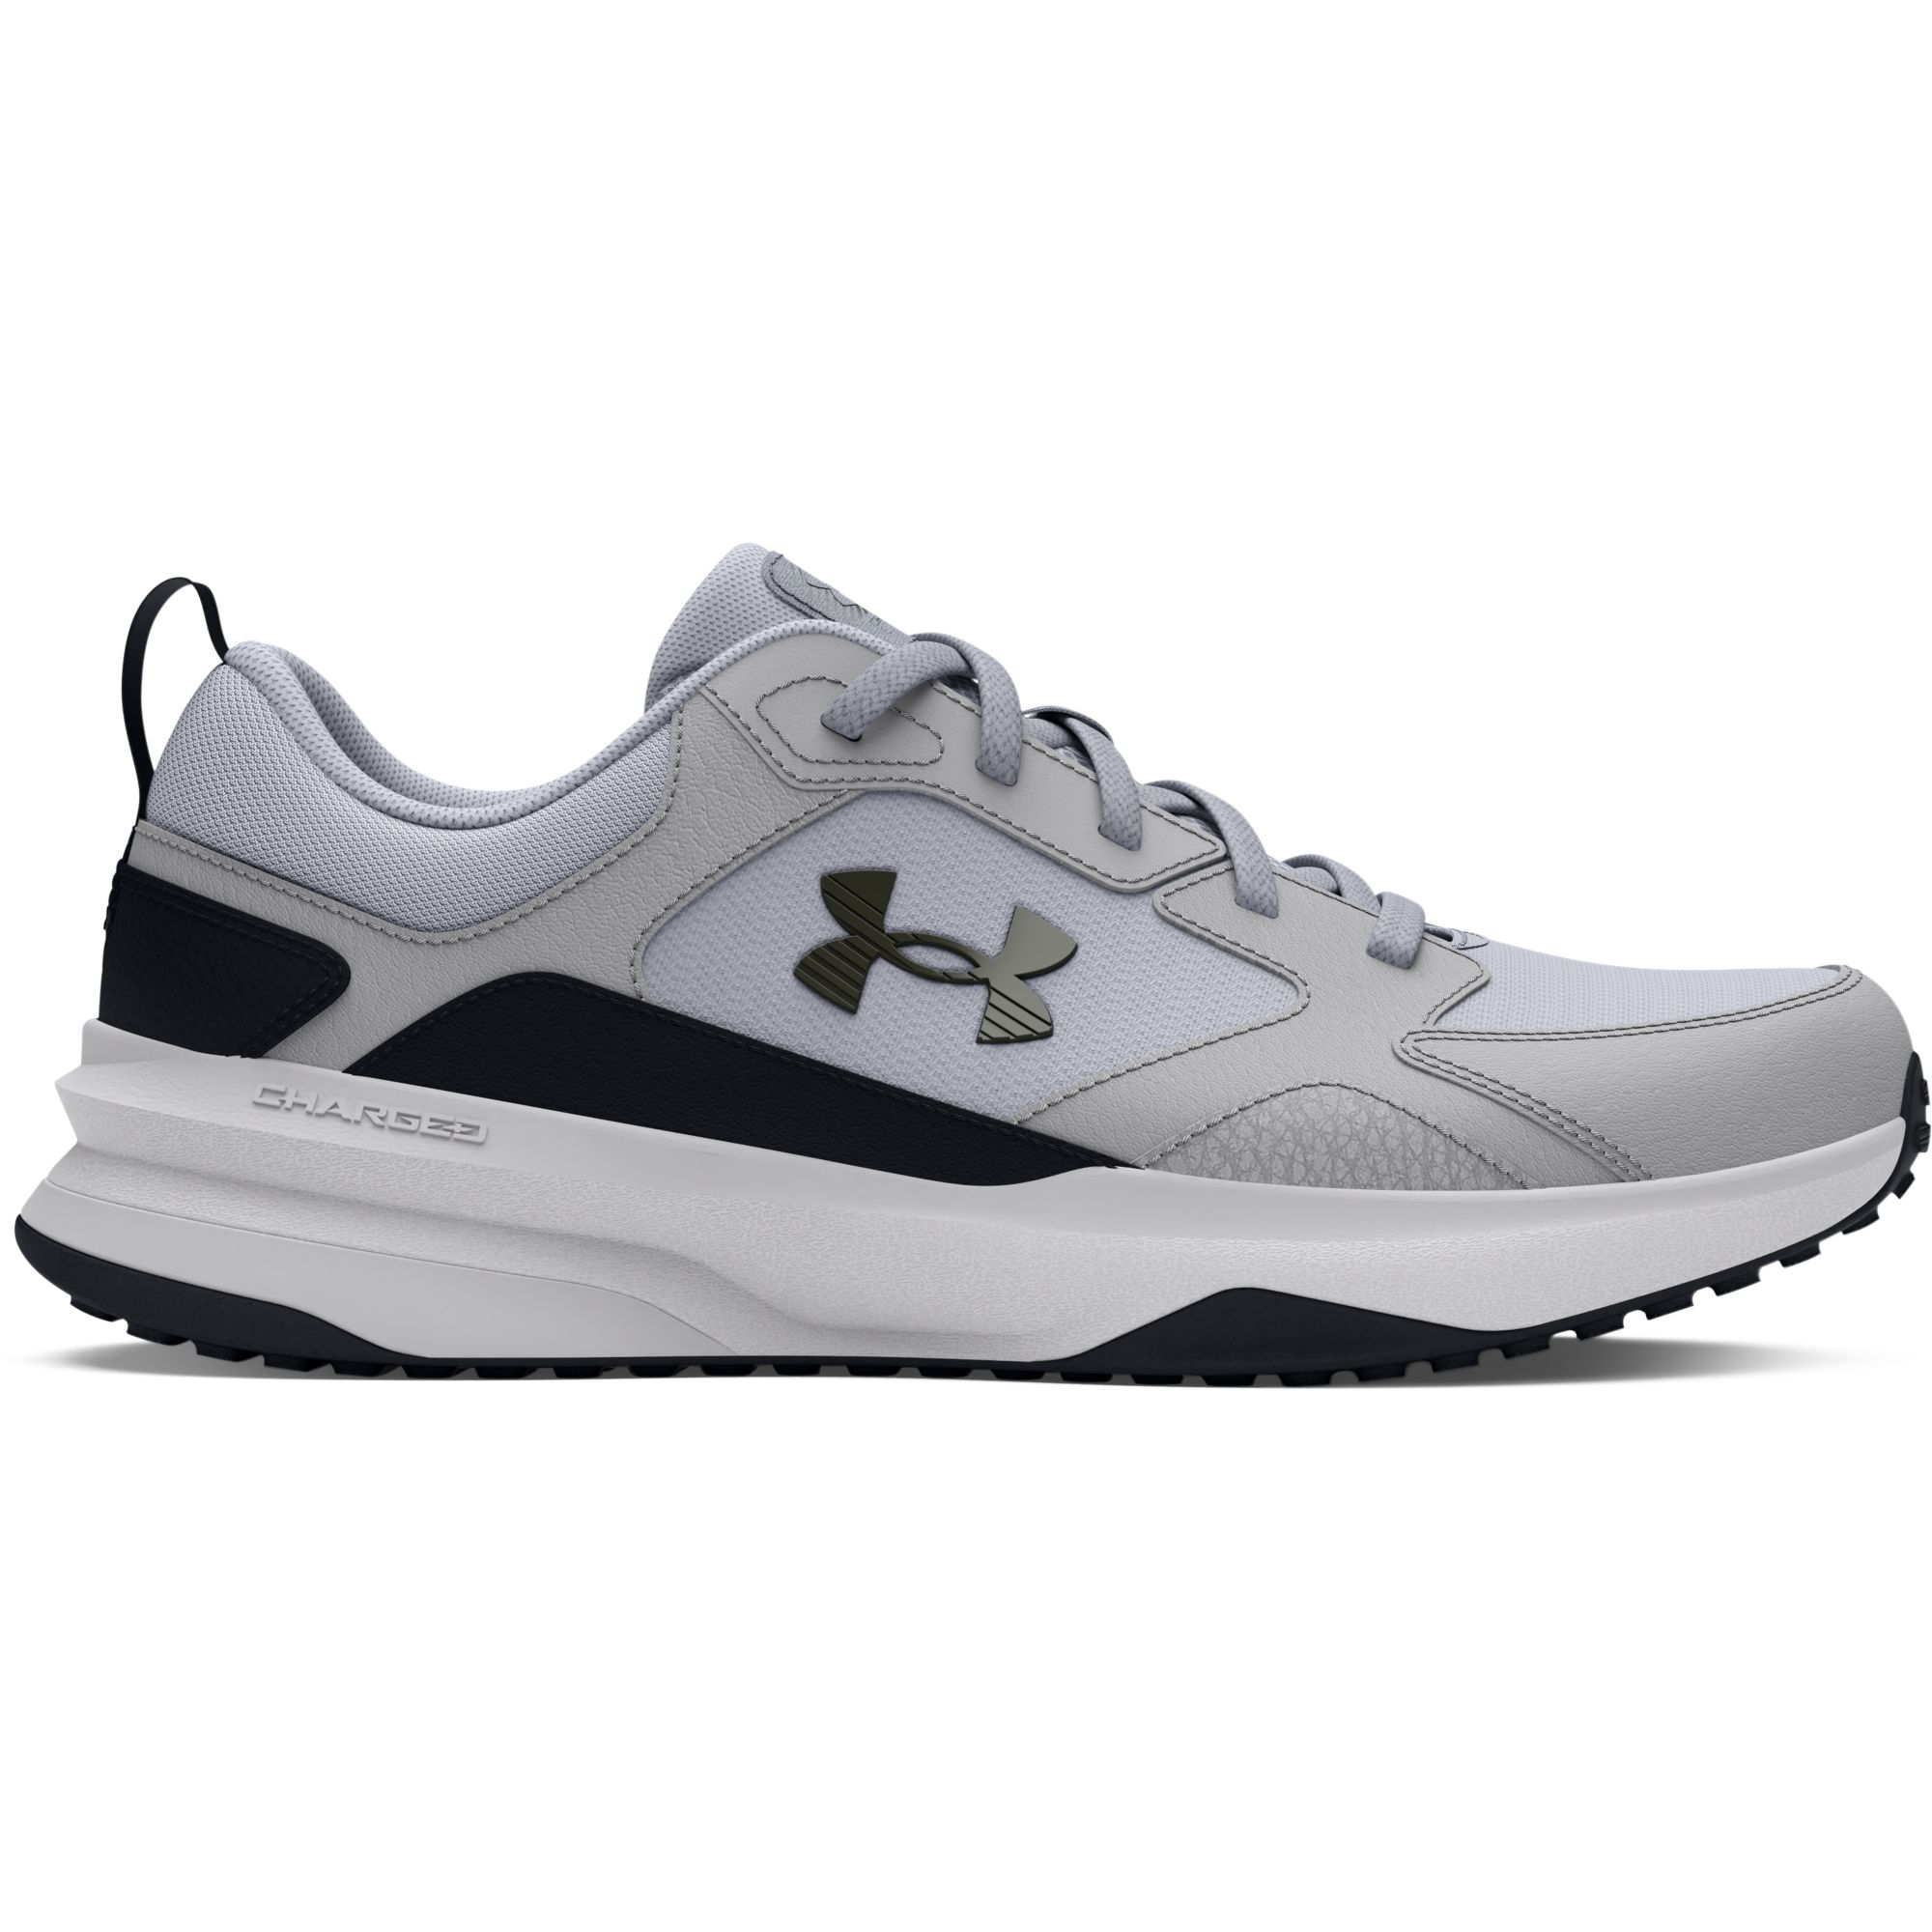 Charged Edge Under Armour - 3340762